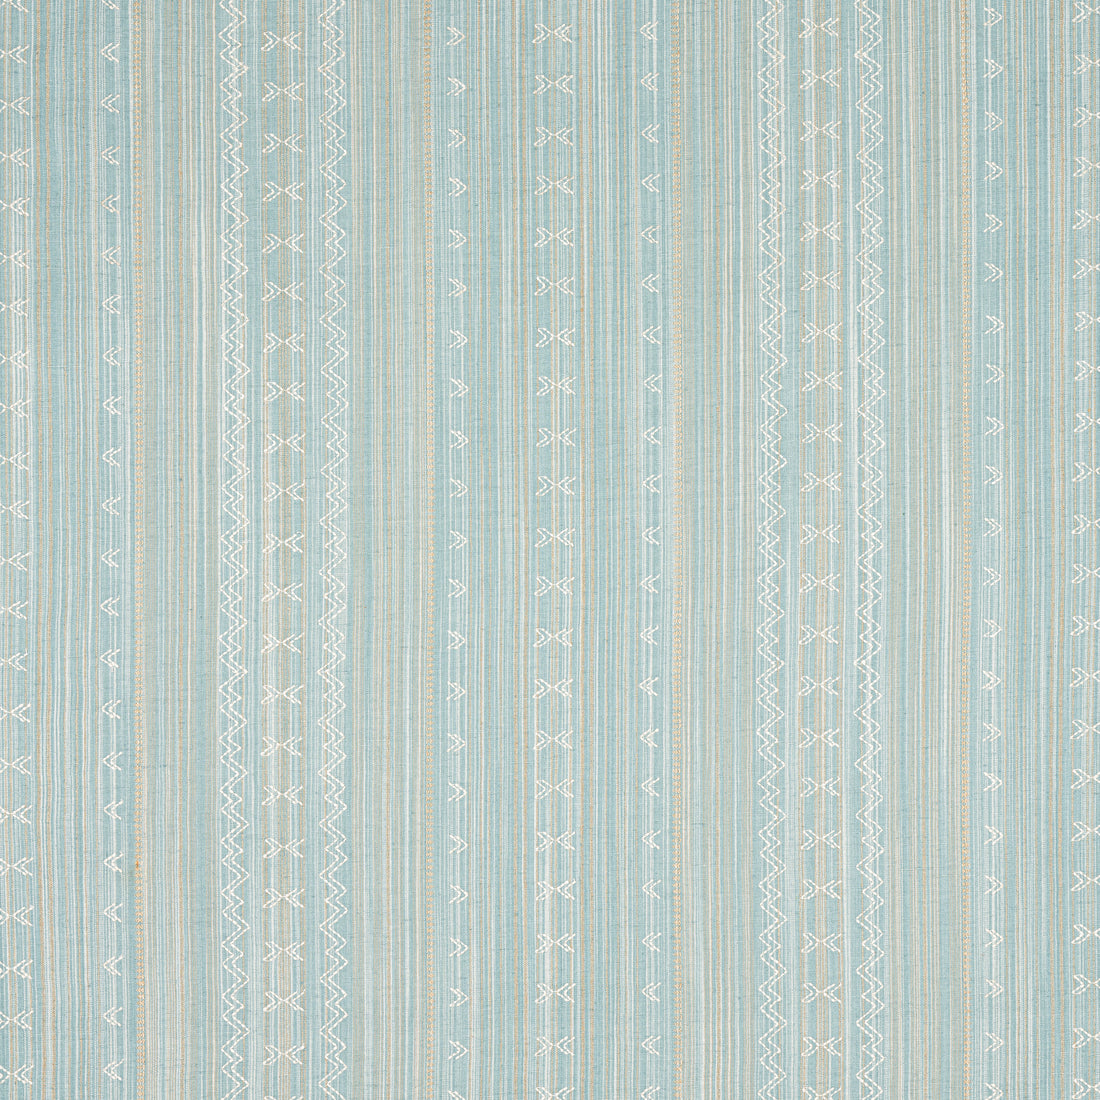 Charter Stripe Embroidery fabric in seaglass color - pattern number W736455 - by Thibaut in the Indienne collection